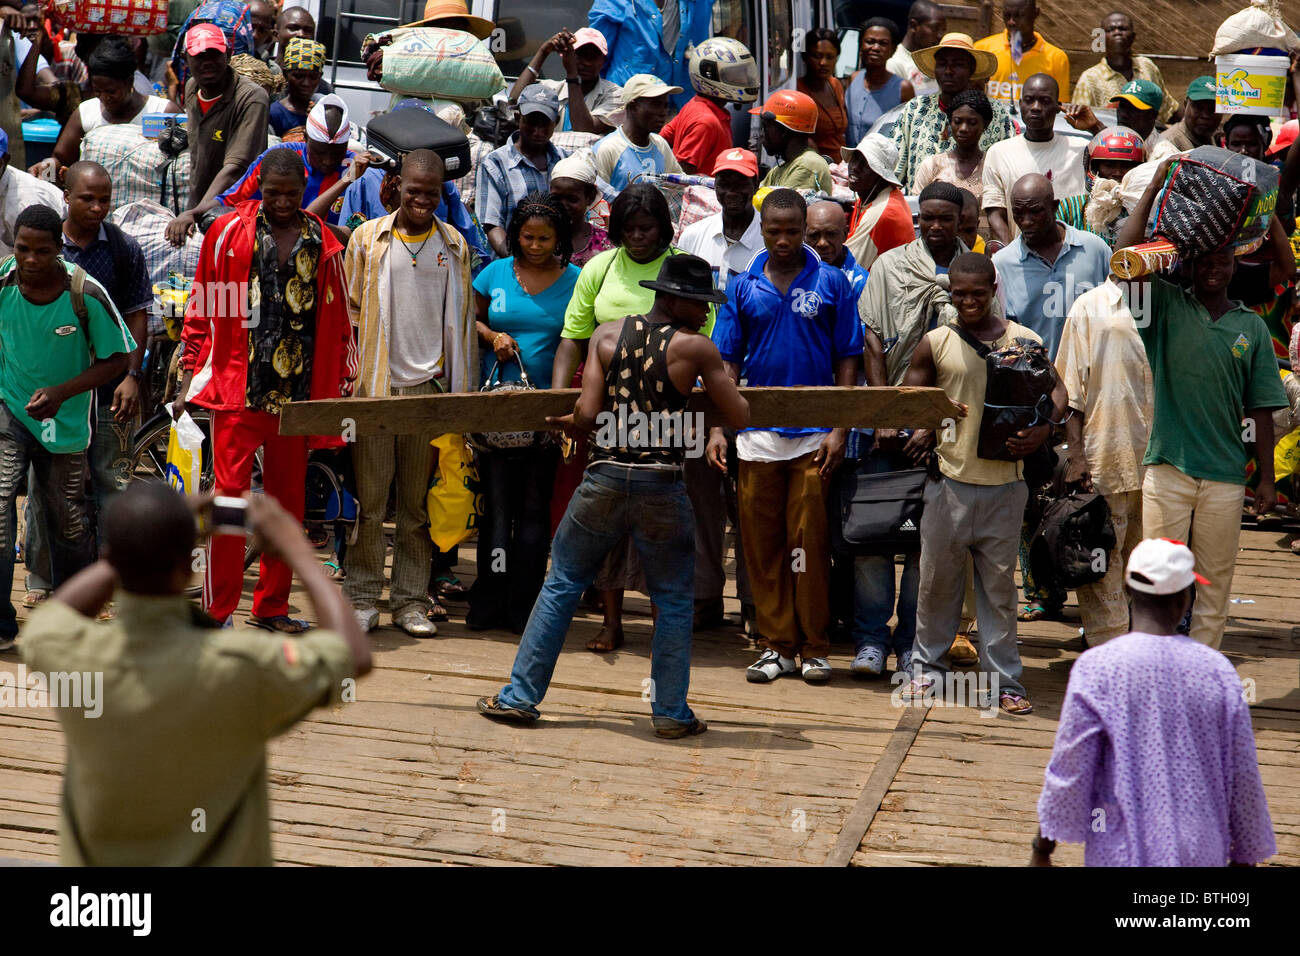 A man tries to control the crowd of passengers on a ferry as it approaches the terminal in Makango, northern Ghana Stock Photo